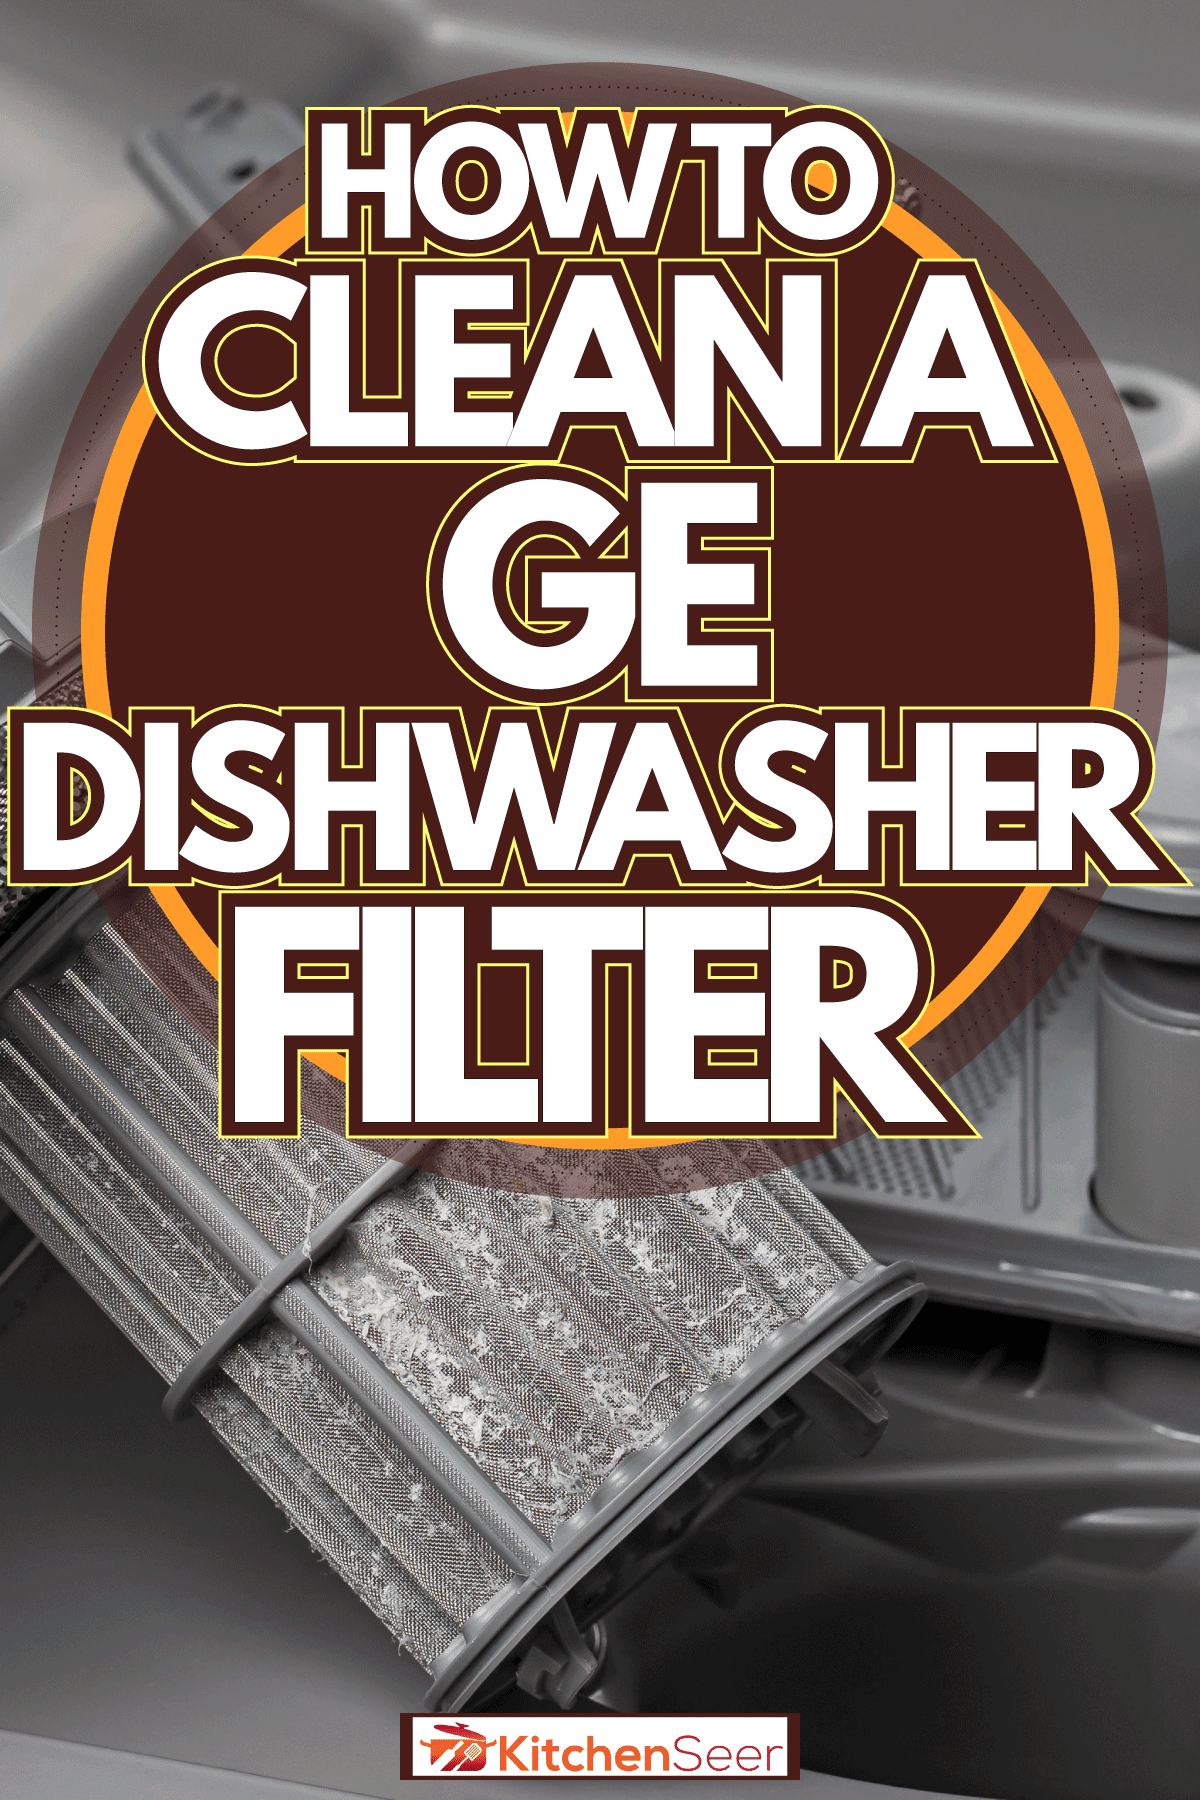 A perfectly cleaned GE Dishwasher Filter, How To Clean A GE Dishwasher Filter